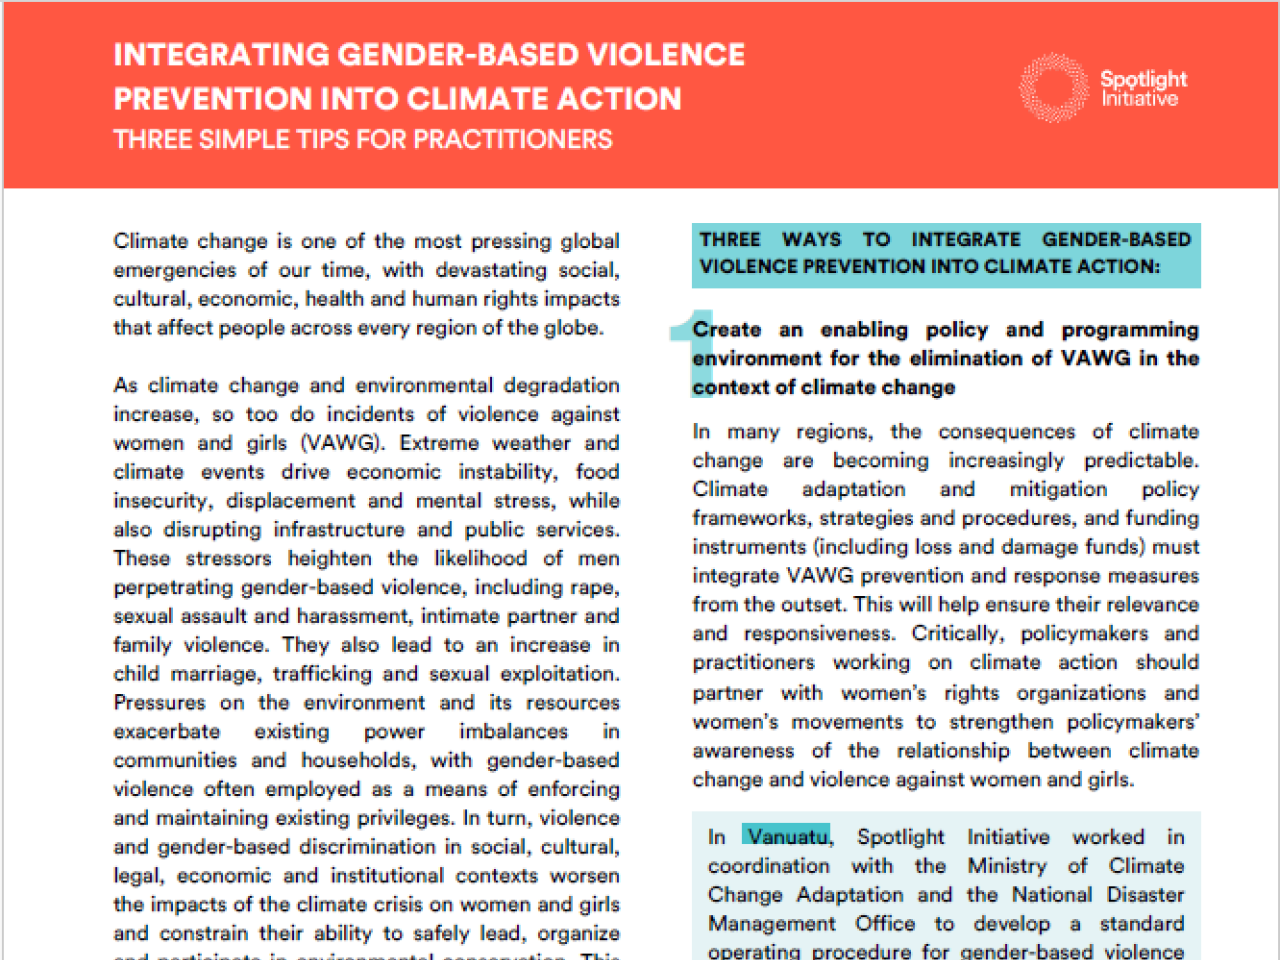 GBV and climate action brief